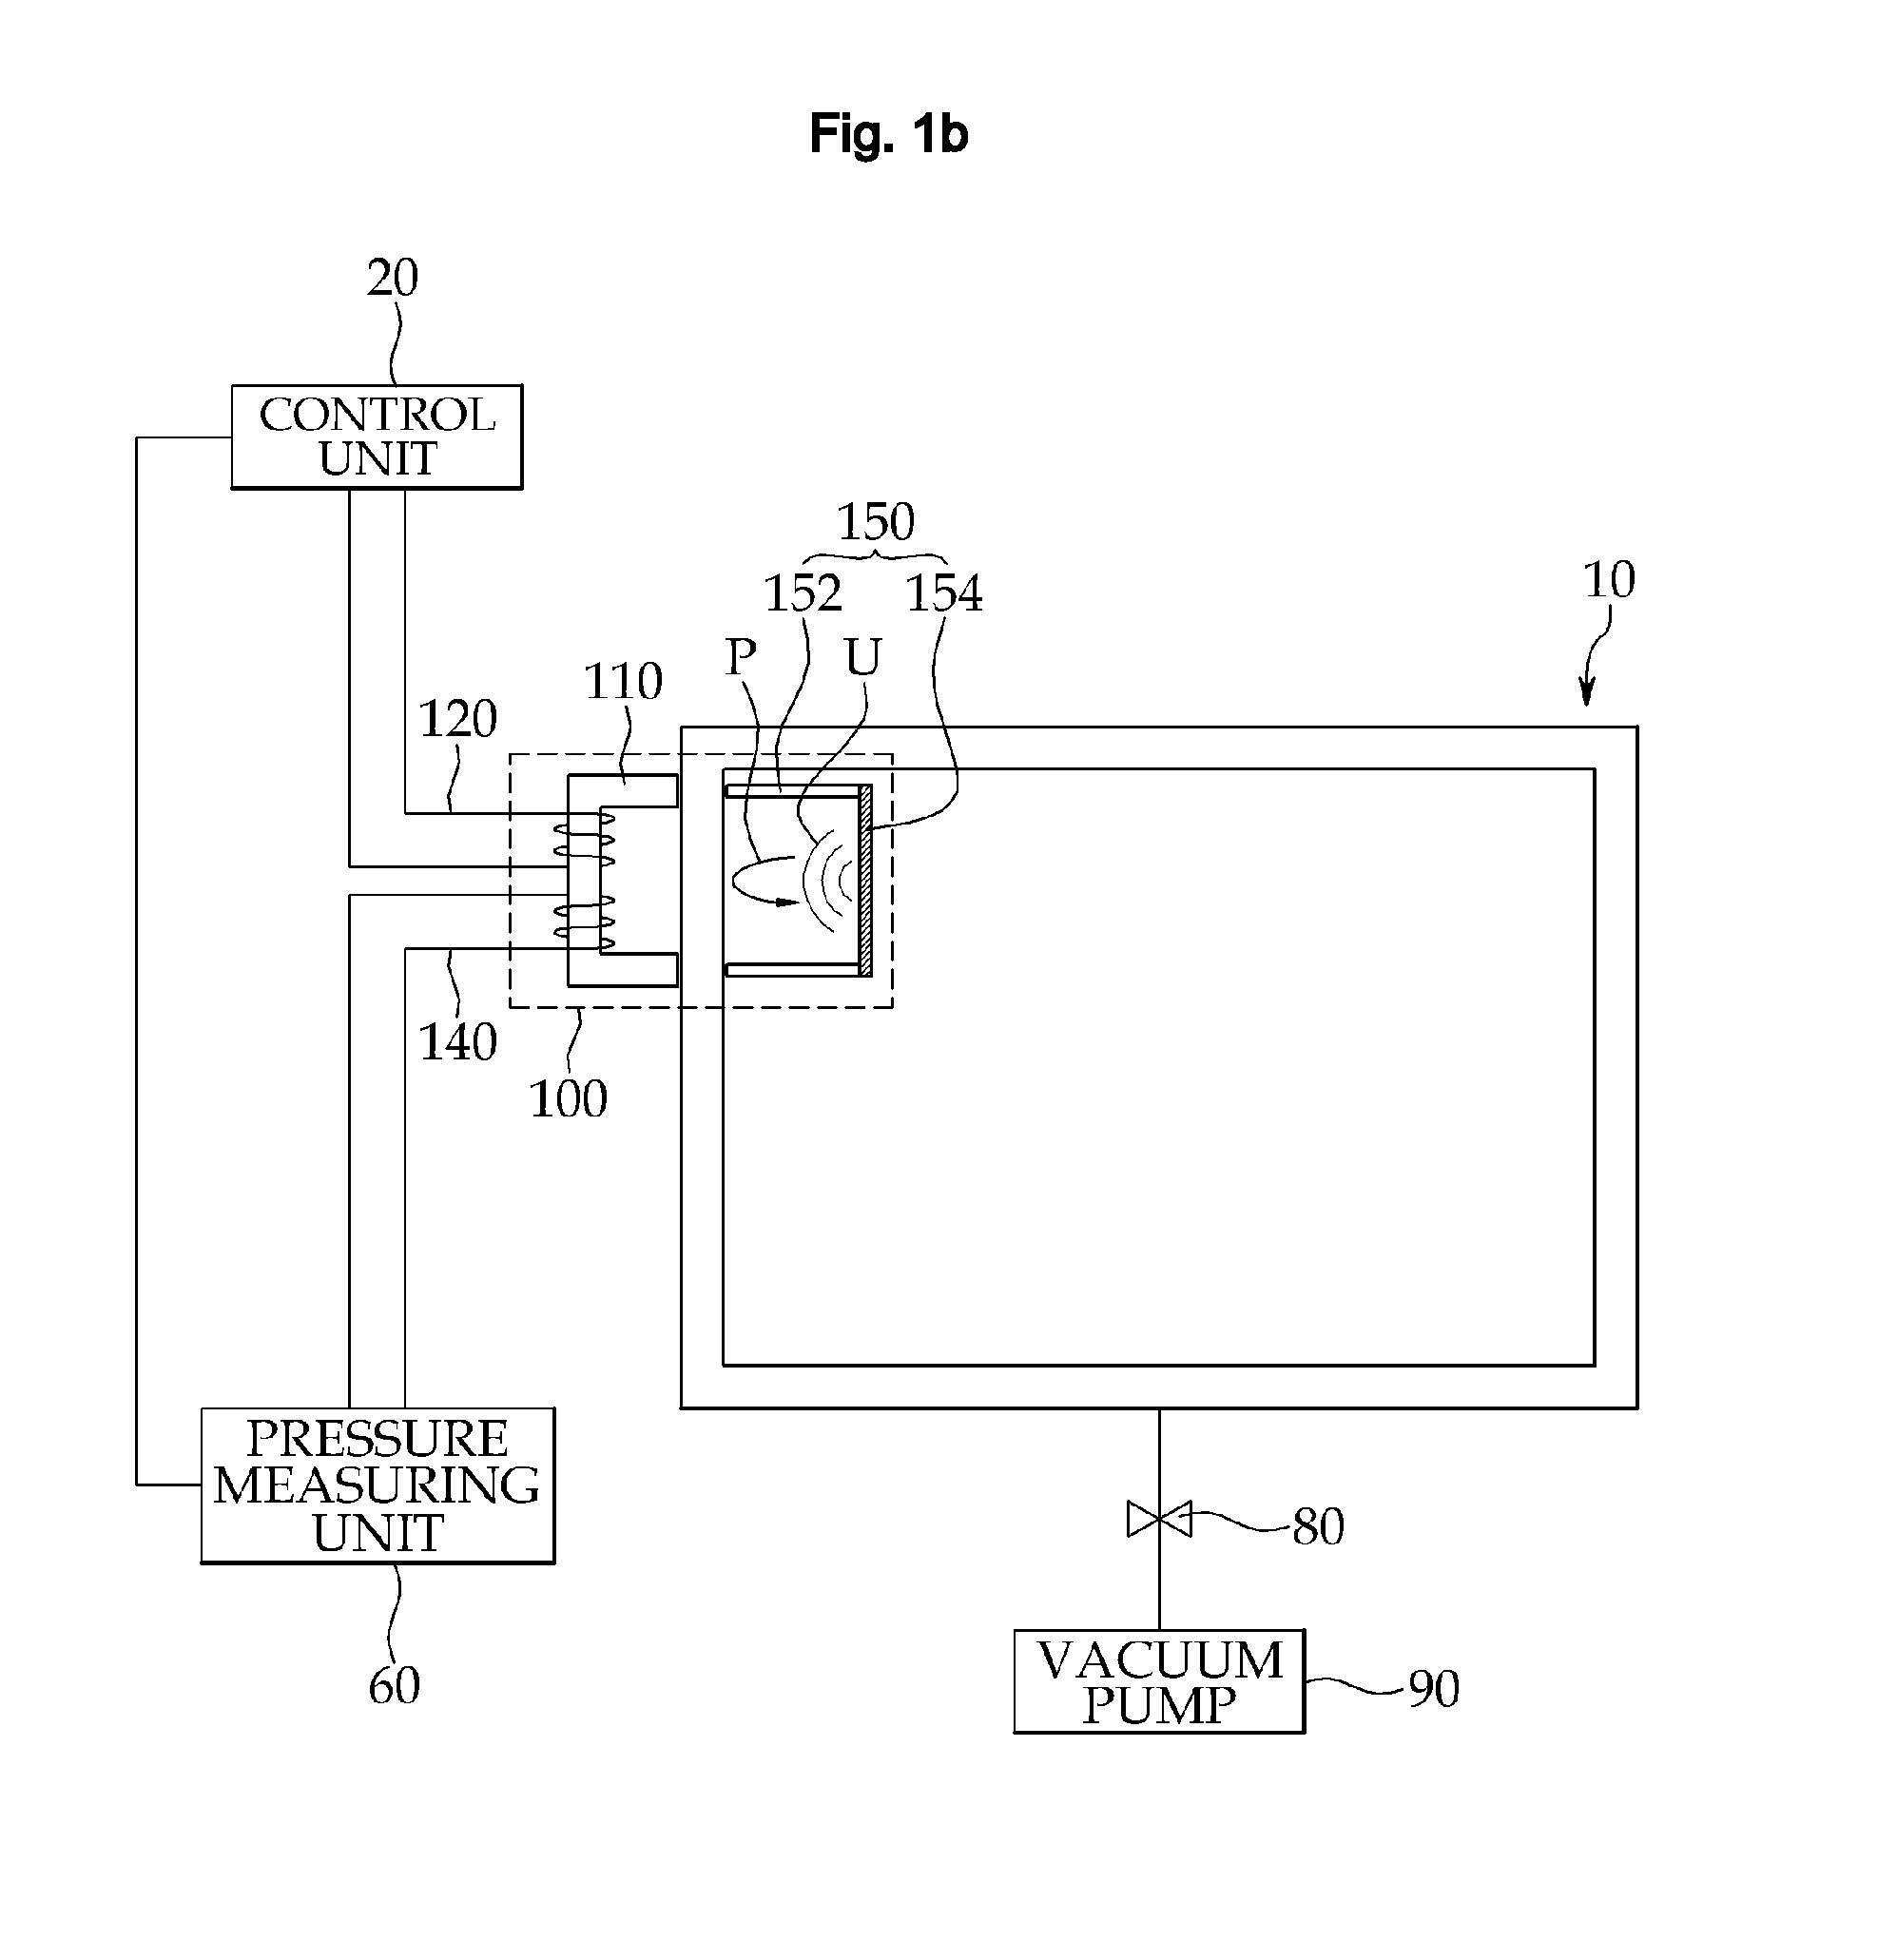 Apparatus for measuring pressure in a vessel using magnetostrictive acoustic transducer